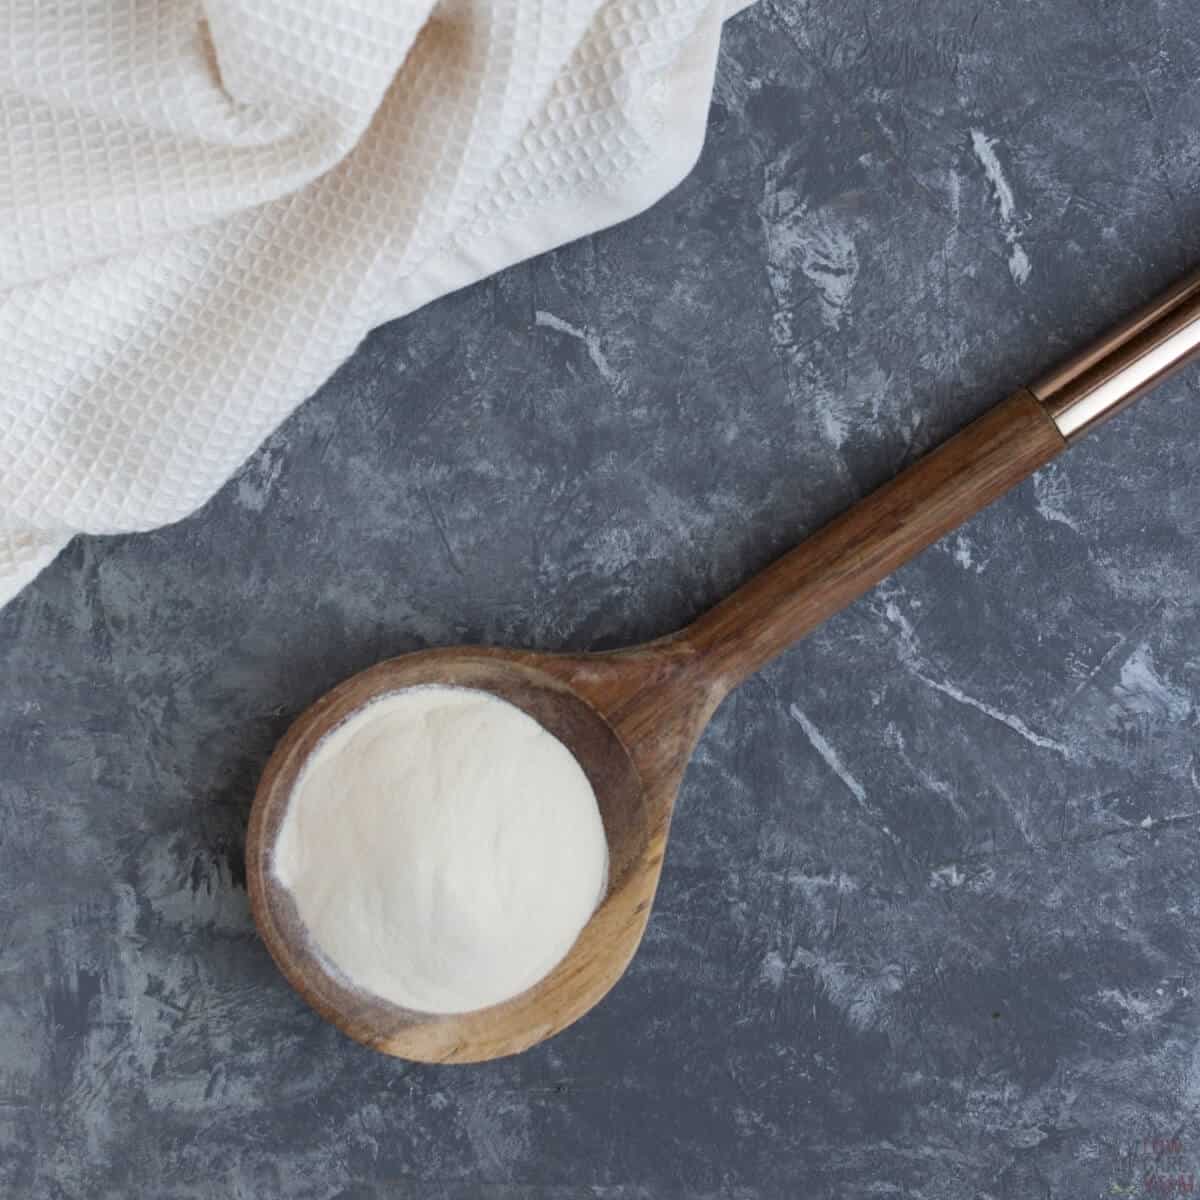 xanthan gum on large wooden spoon square image